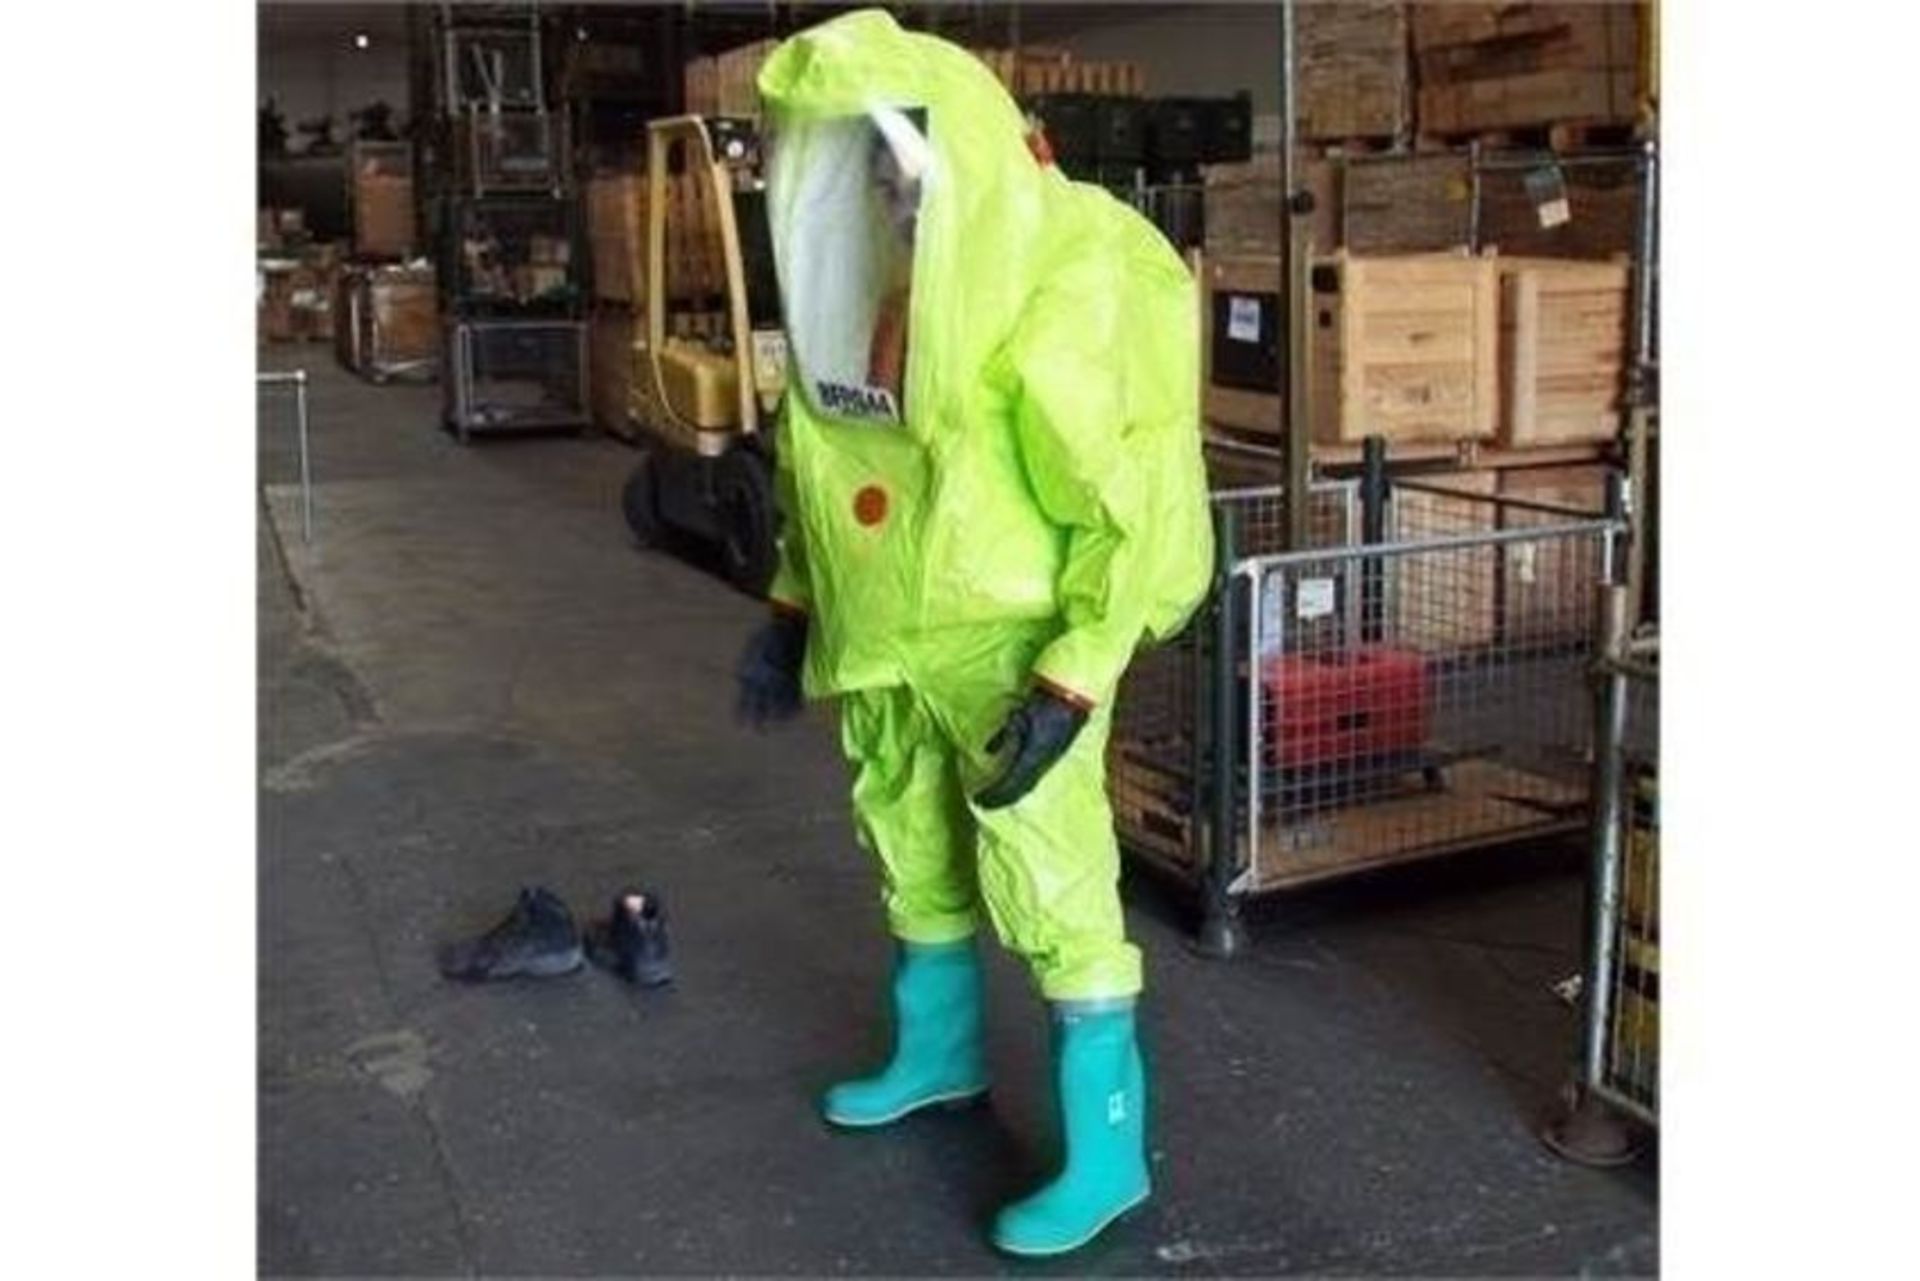 10 x Respirex Tychem TK Gas-Tight Hazmat Suit Type 1A with Attached Boots and Gloves - Image 4 of 10